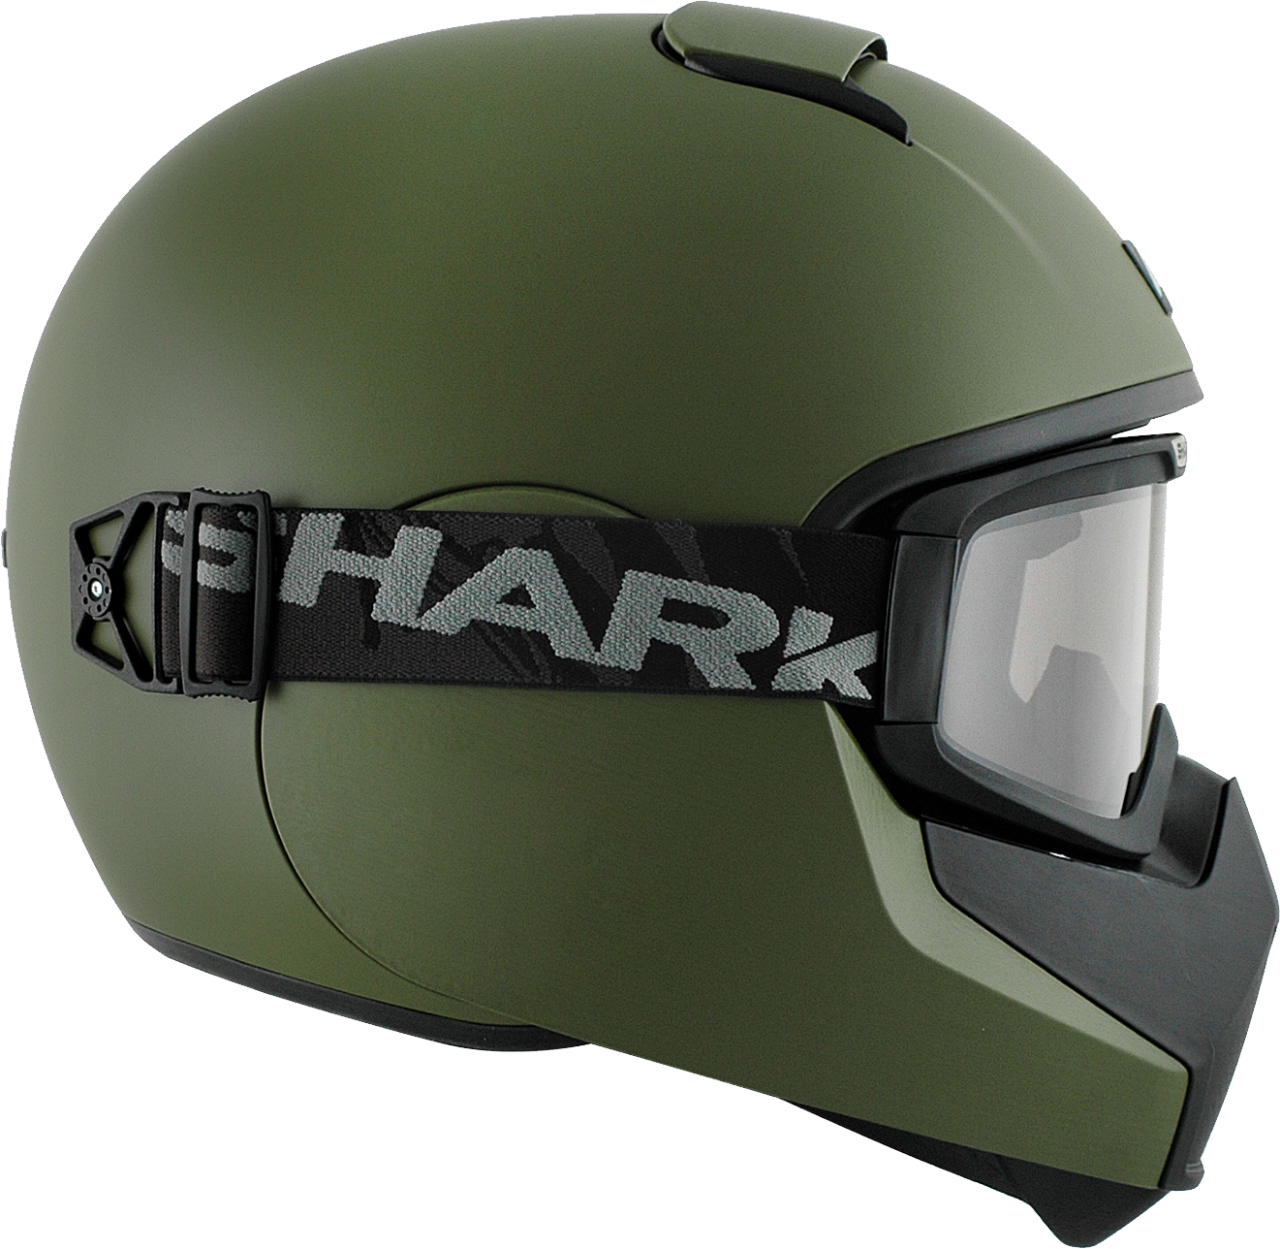 Motorcycle Helmet PNG Image - PurePNG | Free transparent CC0 PNG Image Library